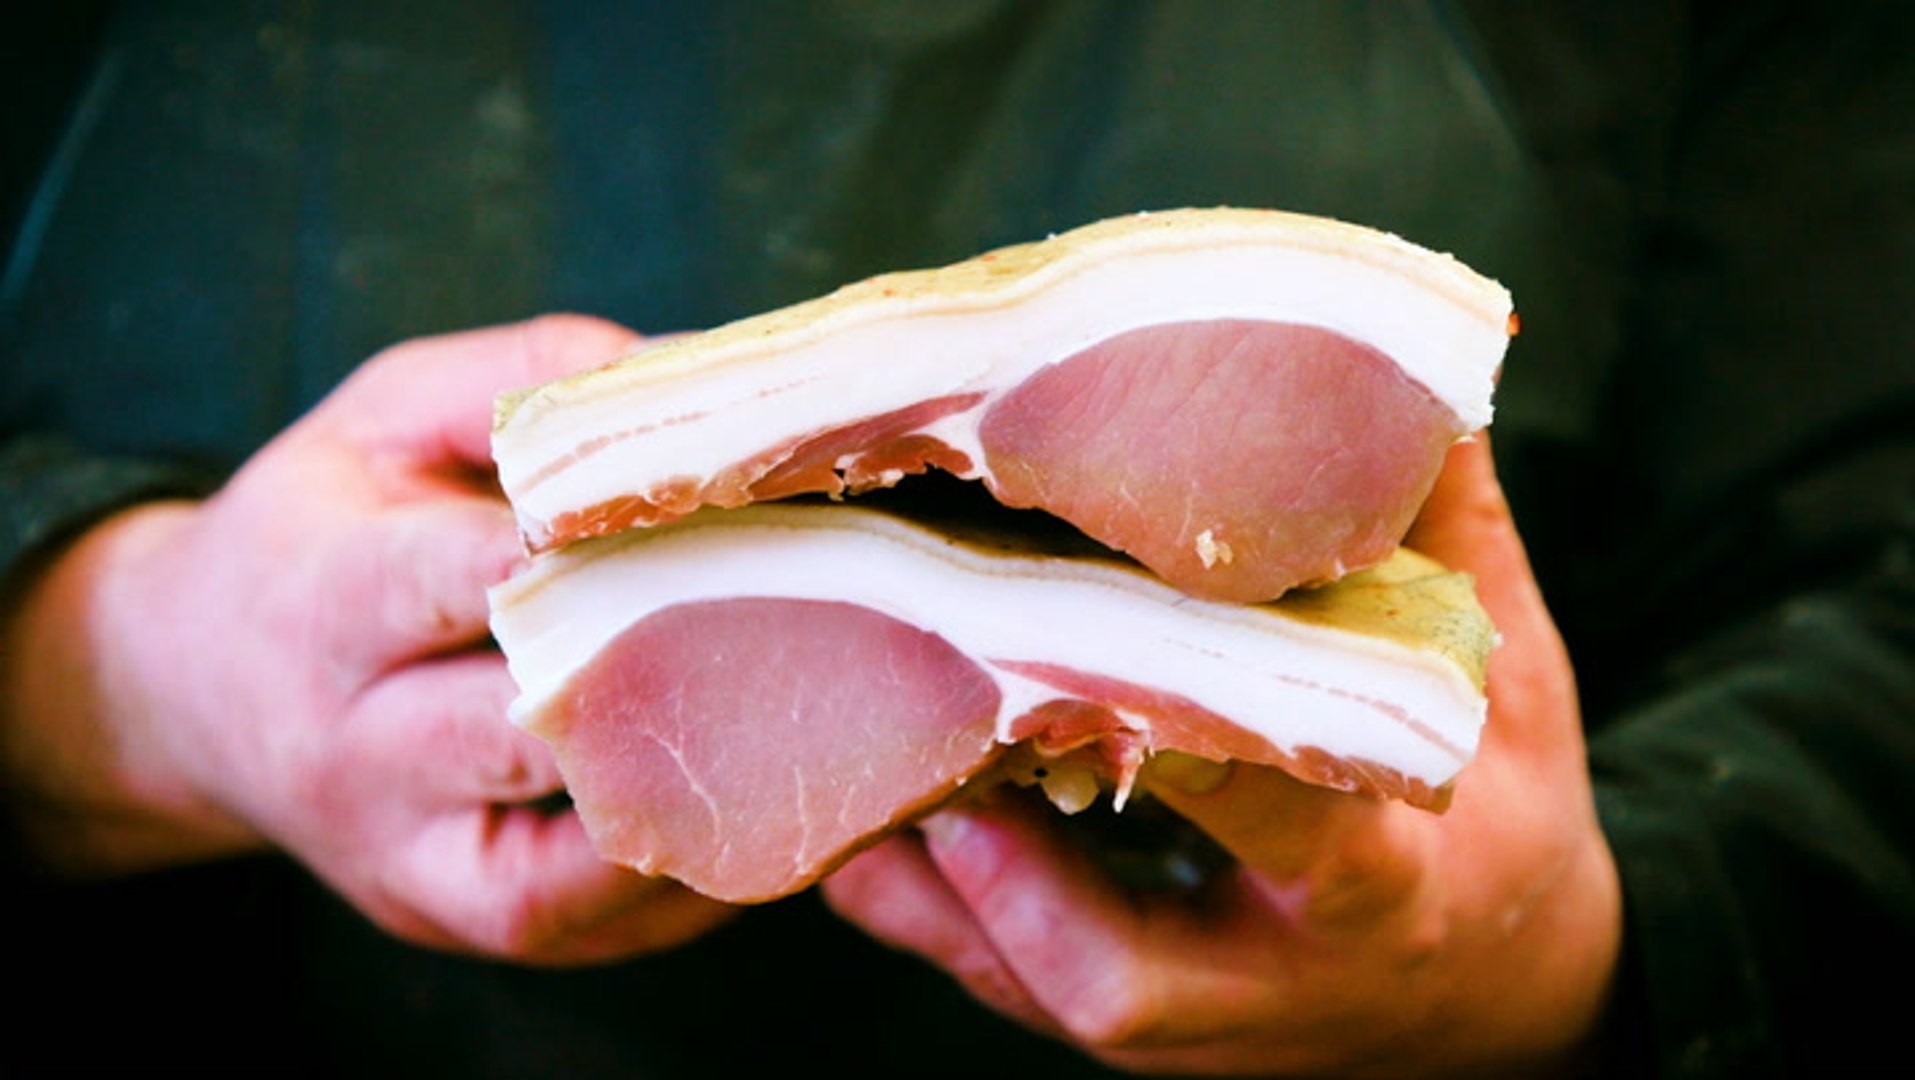 Here's how traditional English bacon is made